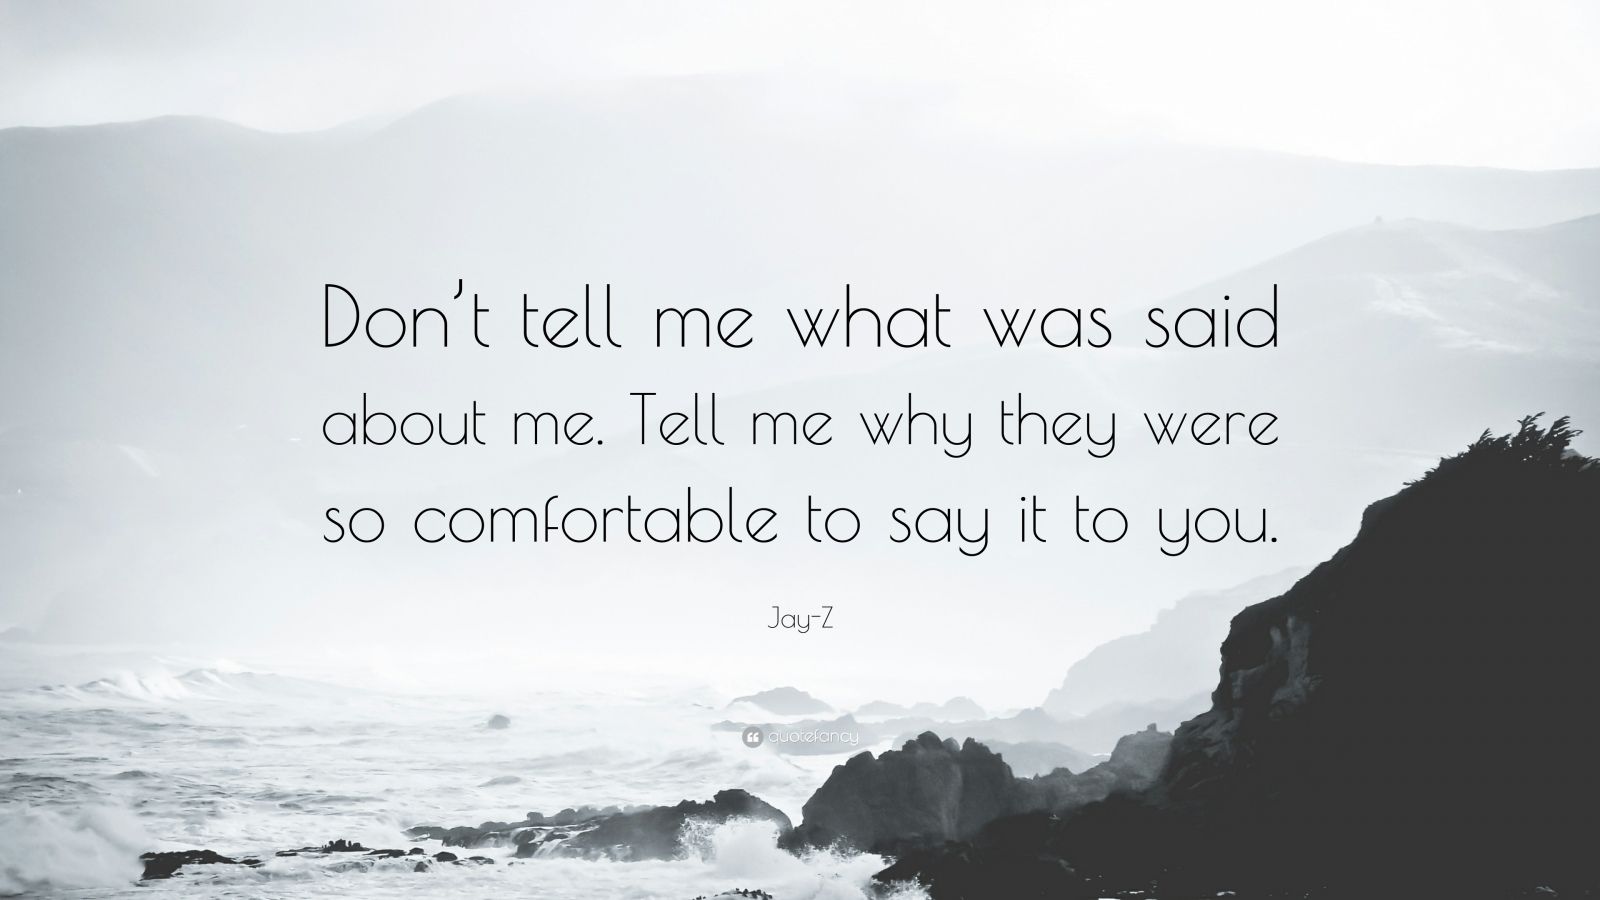 Jay-Z Quote: “Don’t tell me what was said about me. Tell me why they